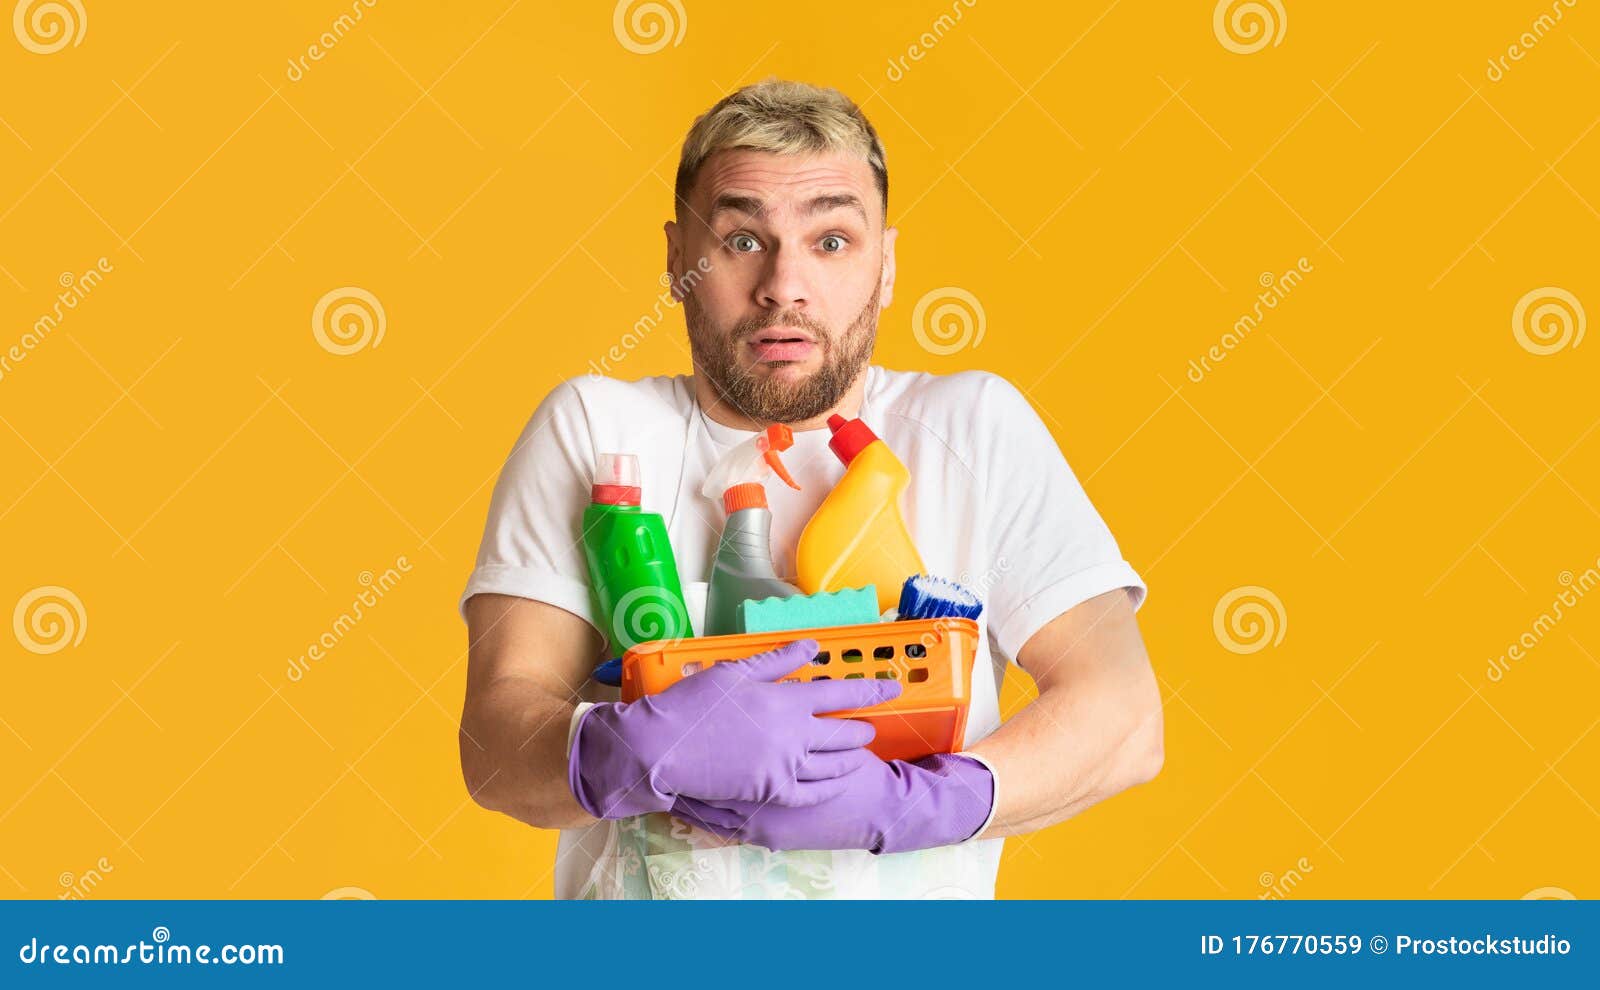 Funny Man with Basket of Cleaning Supplies Stock Image - Image of ...